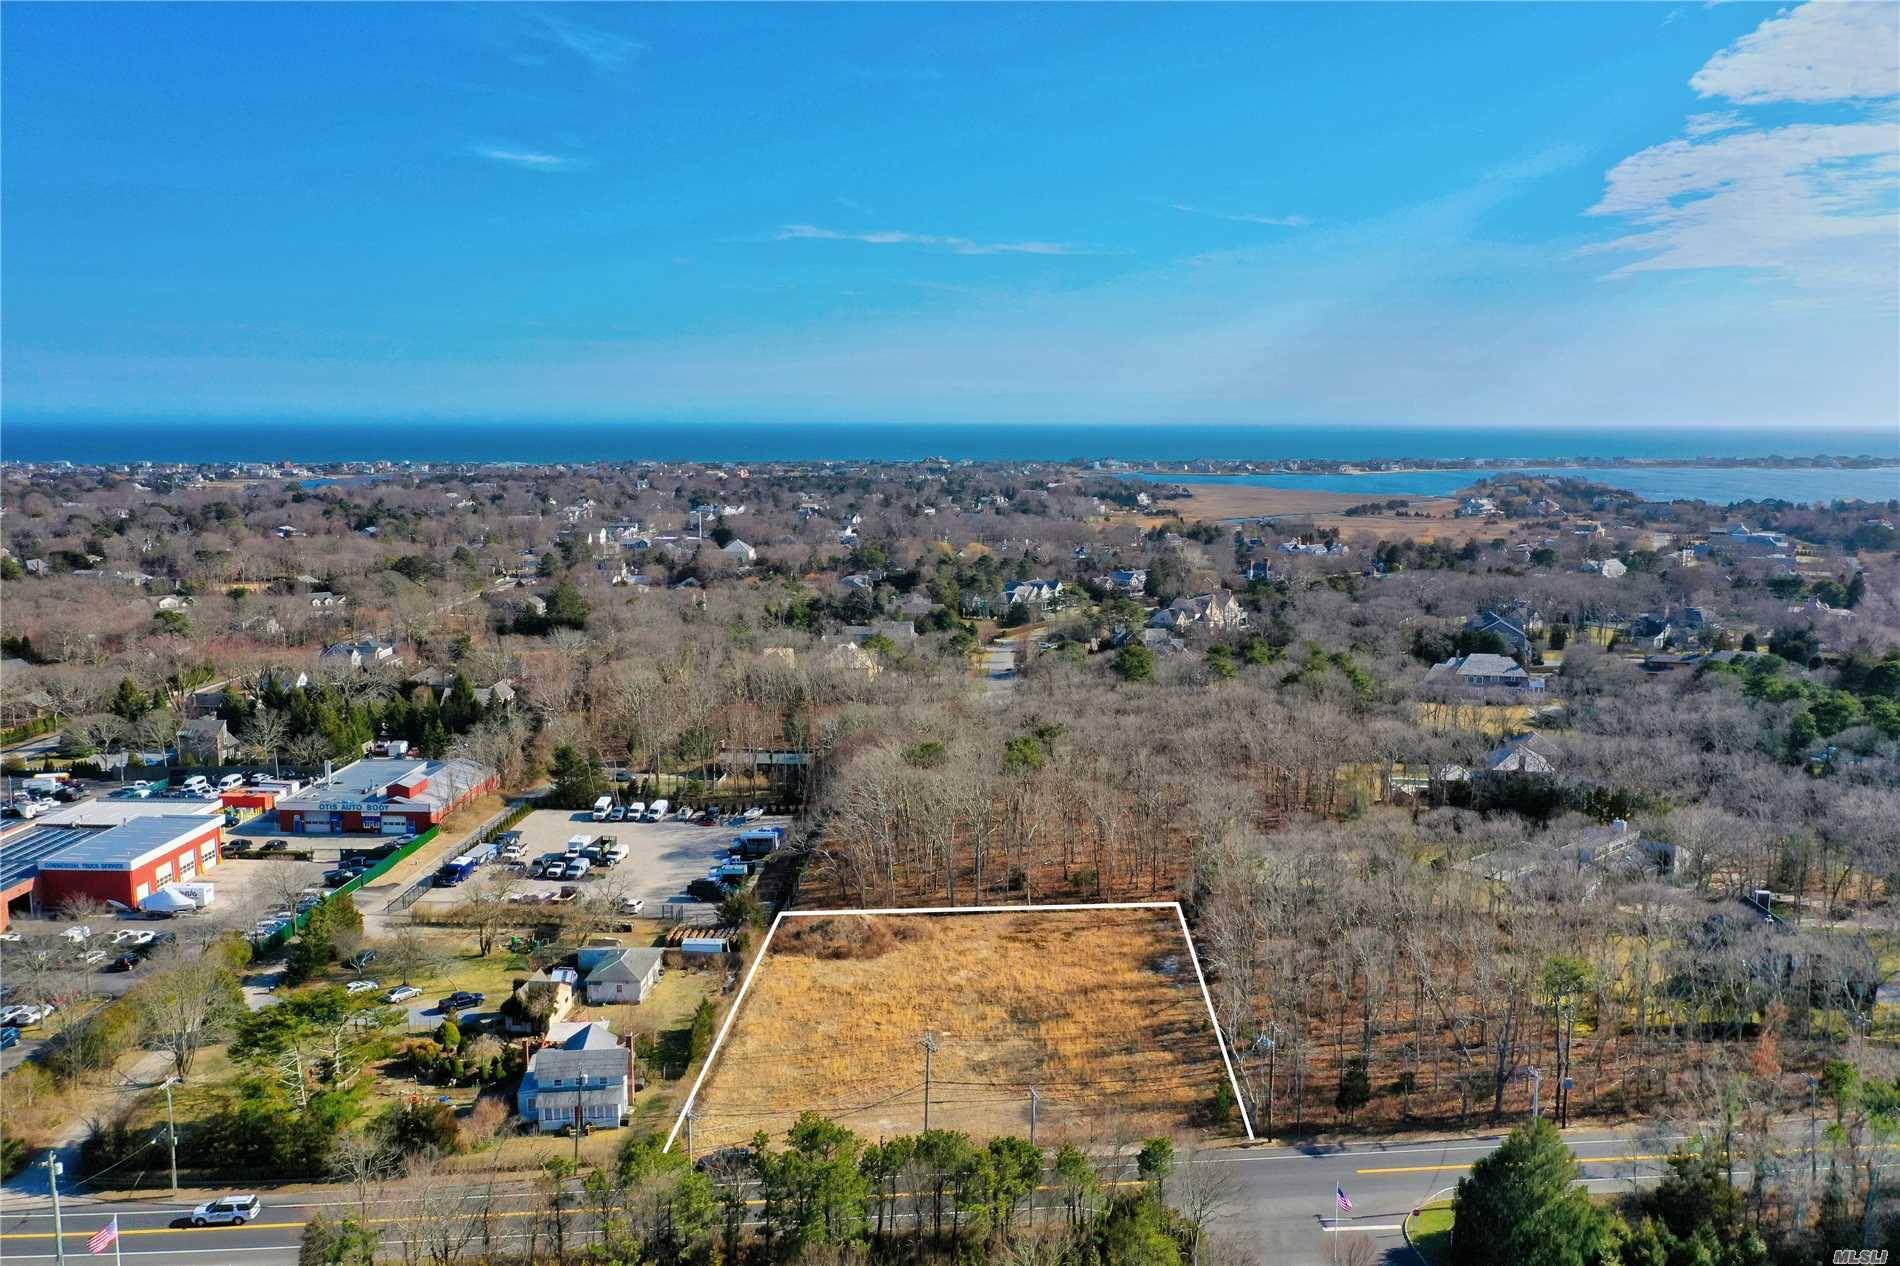 New B2 commercial lot in Village of Quogue comes to market with new survey and drawings.